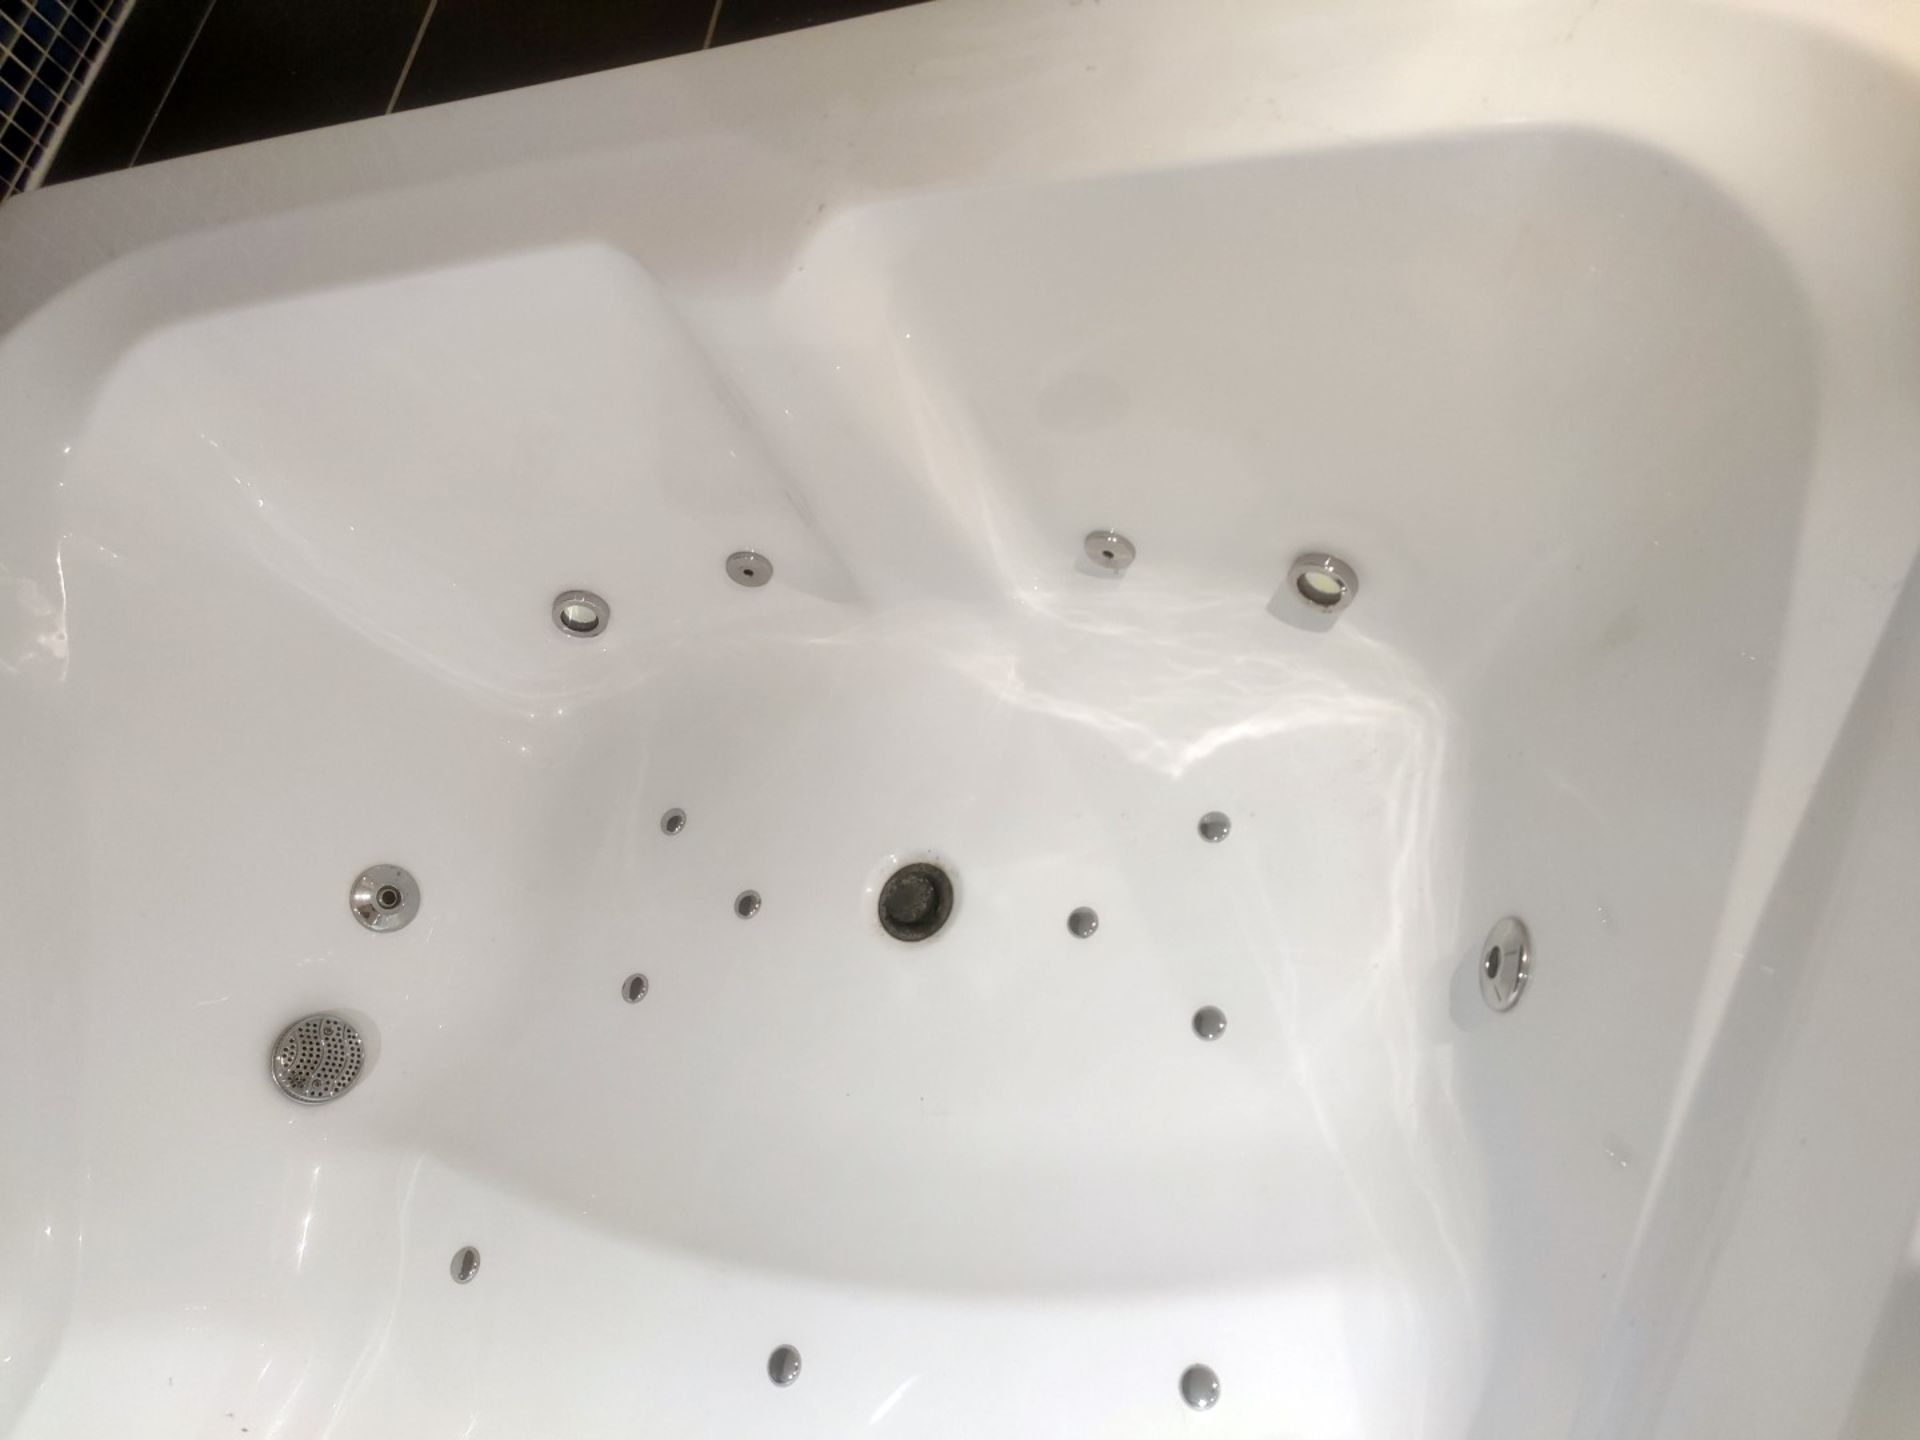 1 x Bronte Jacuzzi Whirlpool Bath - Approx 6.5ft x 5ft Size - Includes Brassware, Water Jets & Pump - Image 6 of 15